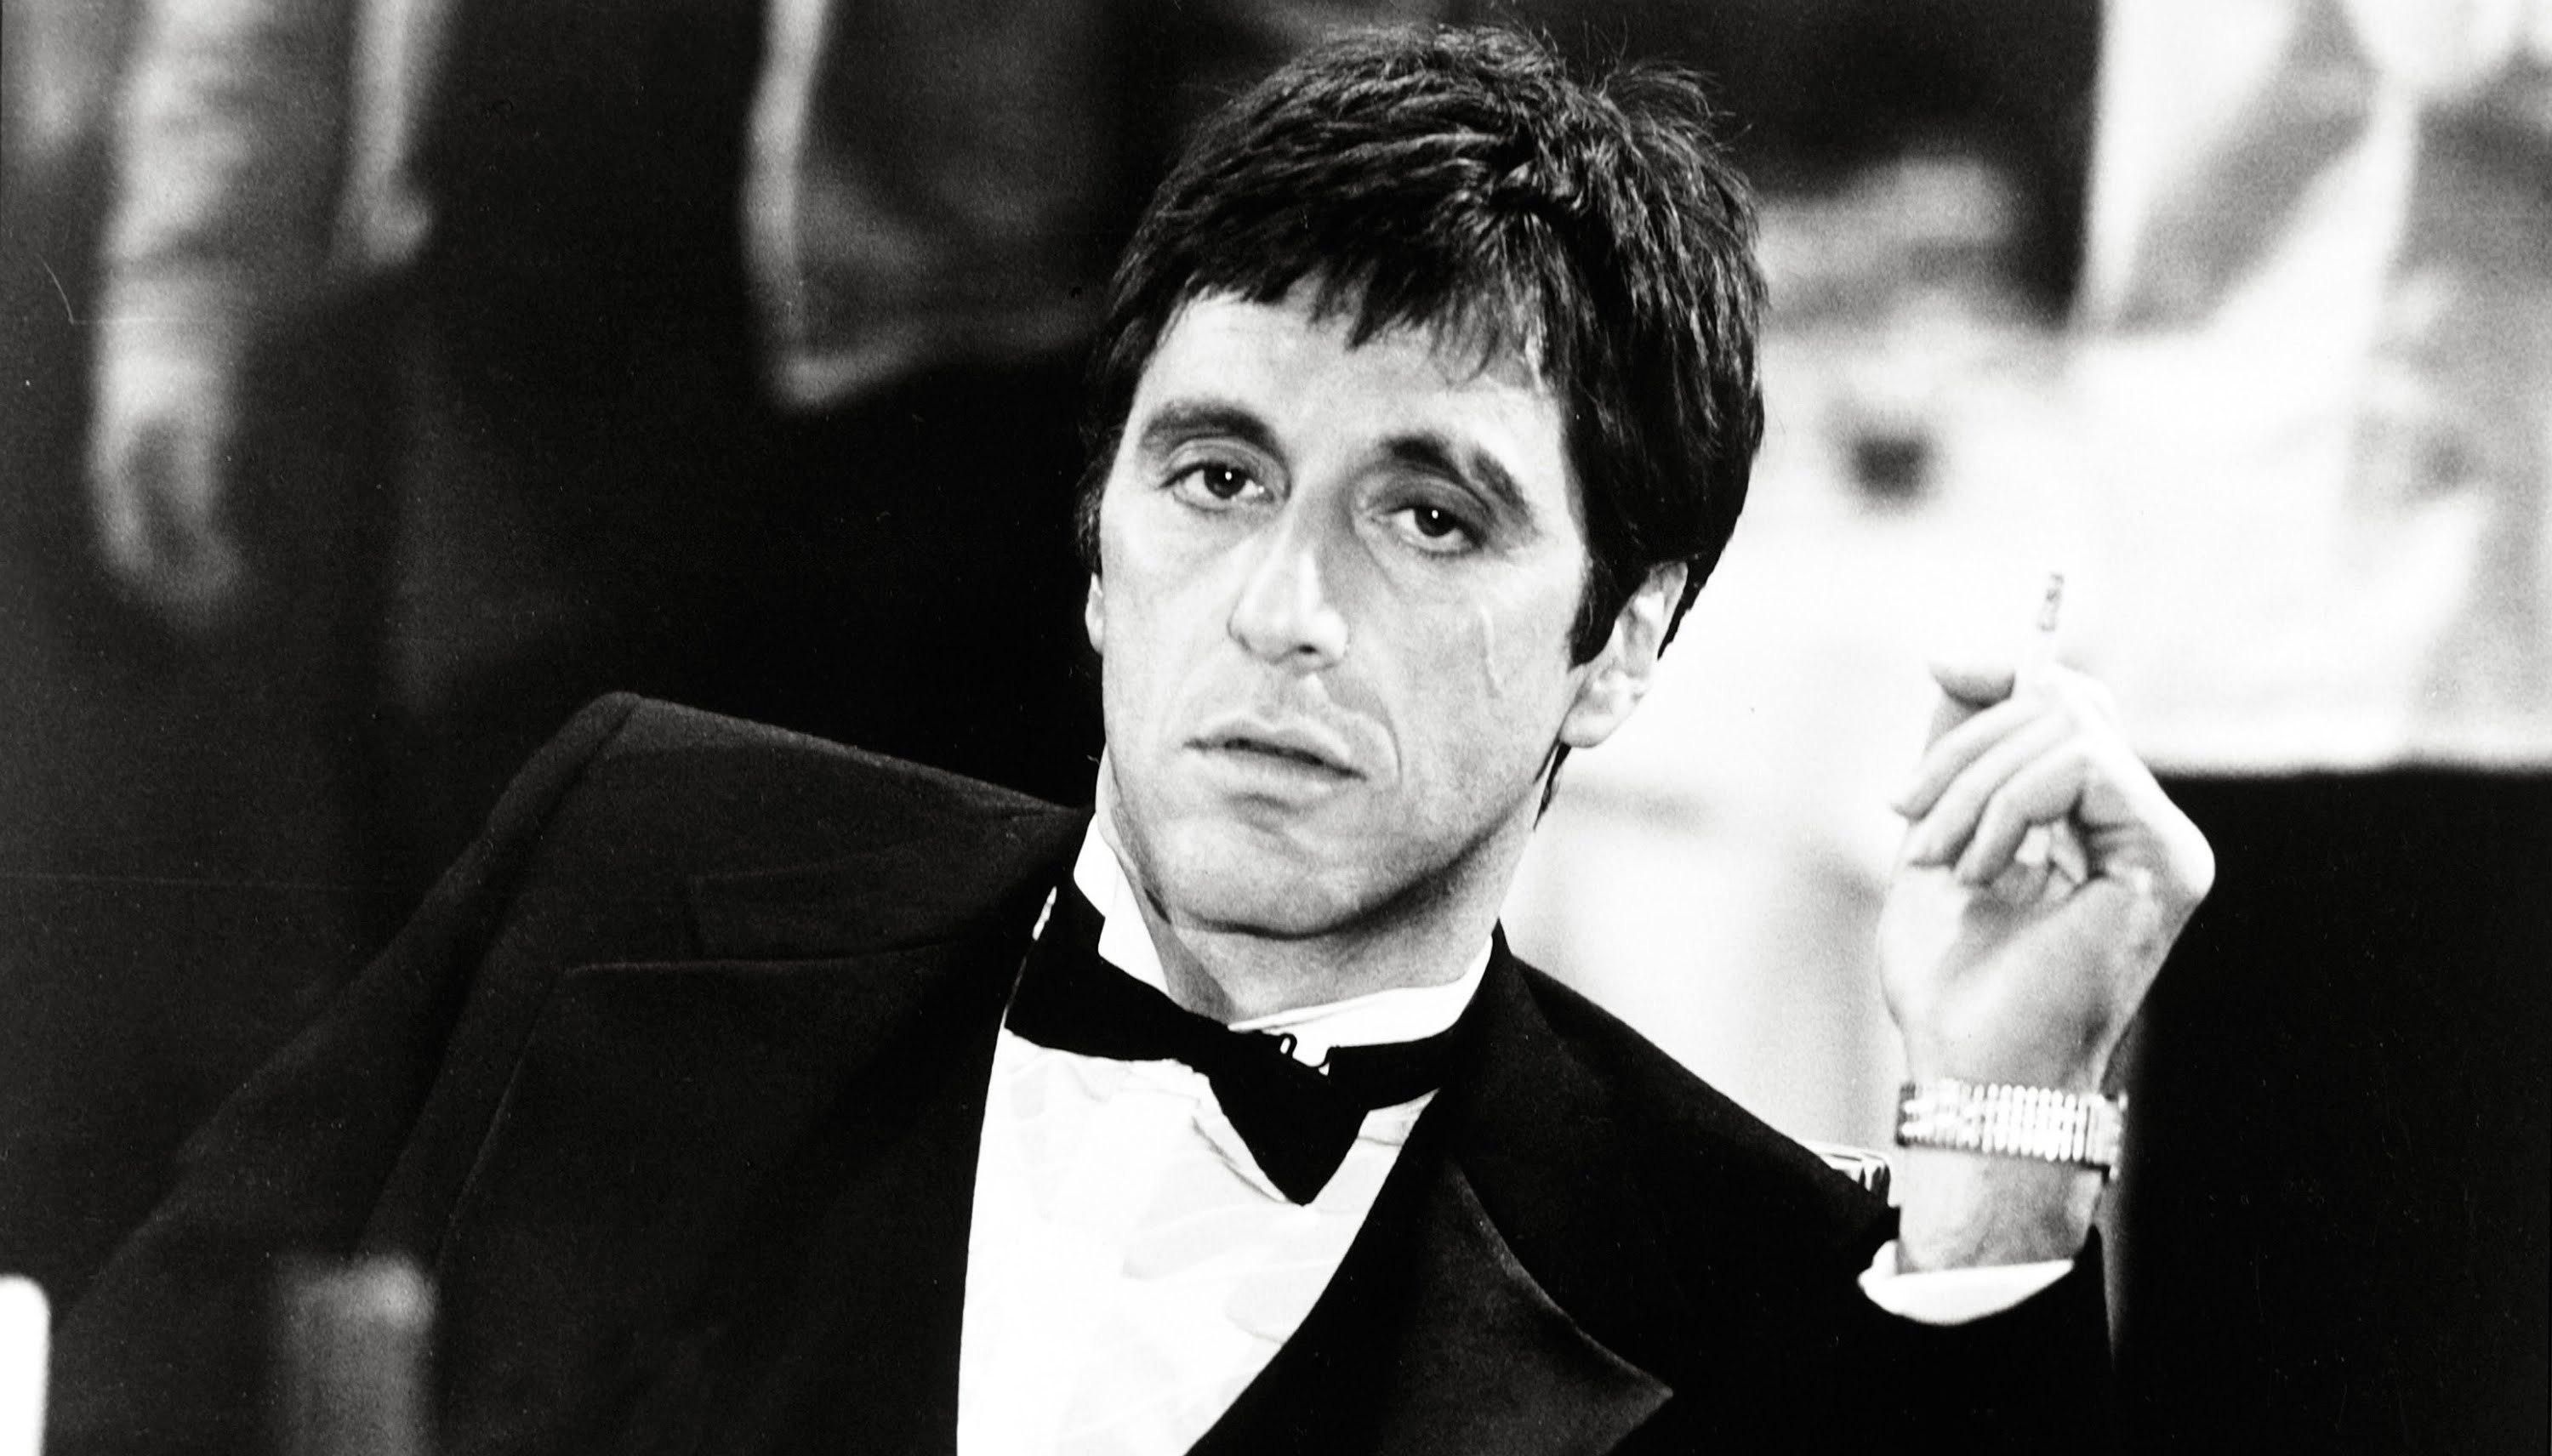 Al Pacino. Nominations: 8. Wins: 1. Pacino earned his first Oscar nod in 1973 for The Godfather. In the years following, he earned seven more nods for a total of eight nominations. His most recent nomination, in 1993, also marked his first ever win, in which he took home the Best Actor award for his role in Scent of a Woman.